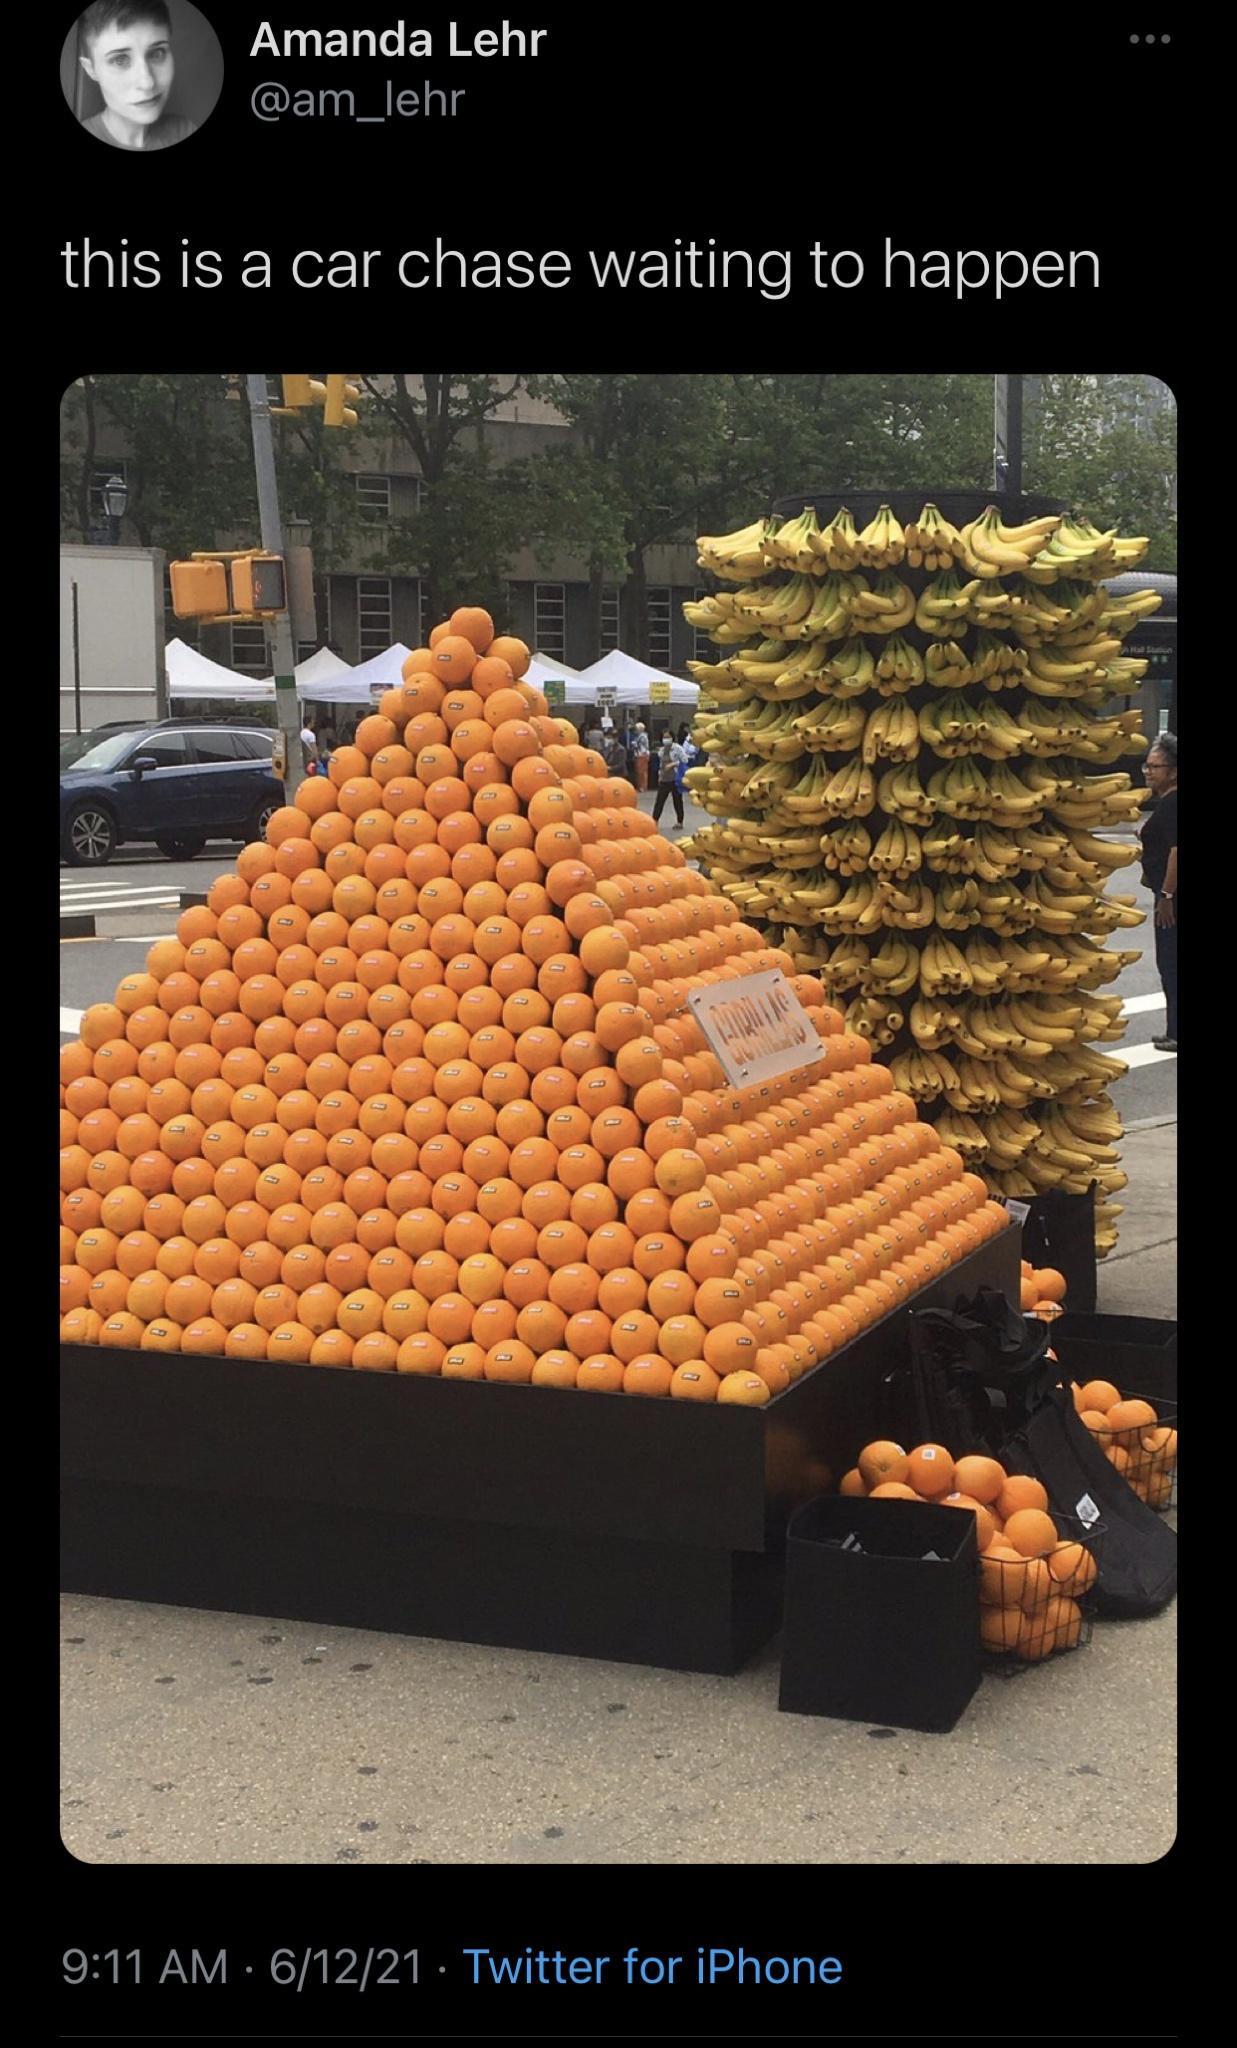 why are the oranges labeled 'gorillas?'